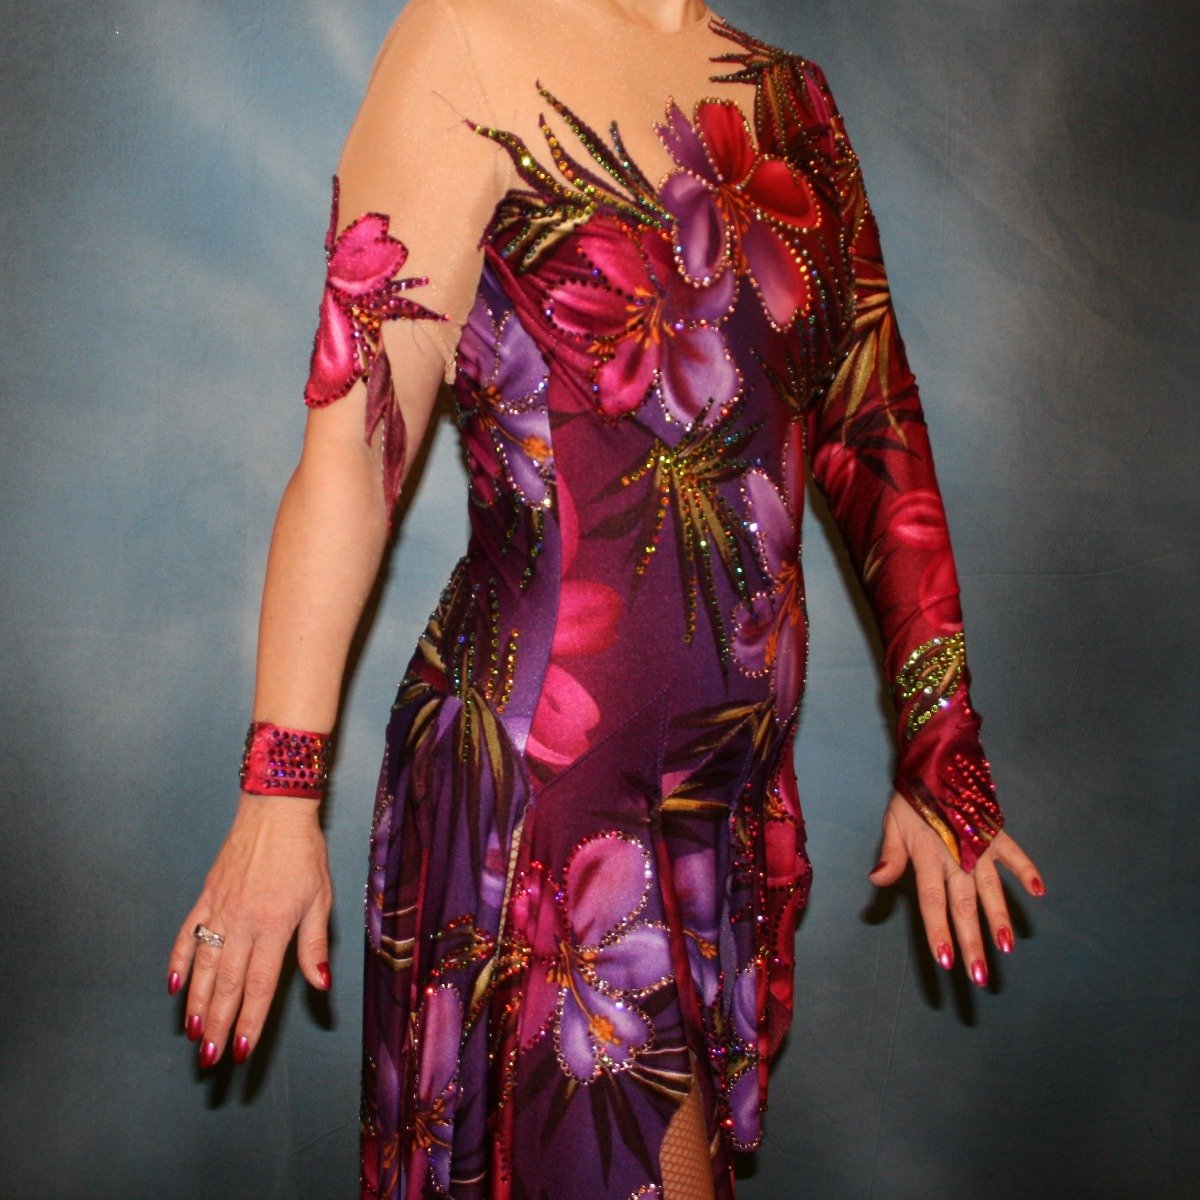 close side view of Tropical print Latin/rhythm dress created in tropical print lycra in burgundies & purples on a nude illusion base, embellished lavishly with Swarovski rhinestone work in burgundies, purples, orchids & a touch of the greens & golds that are within the print.